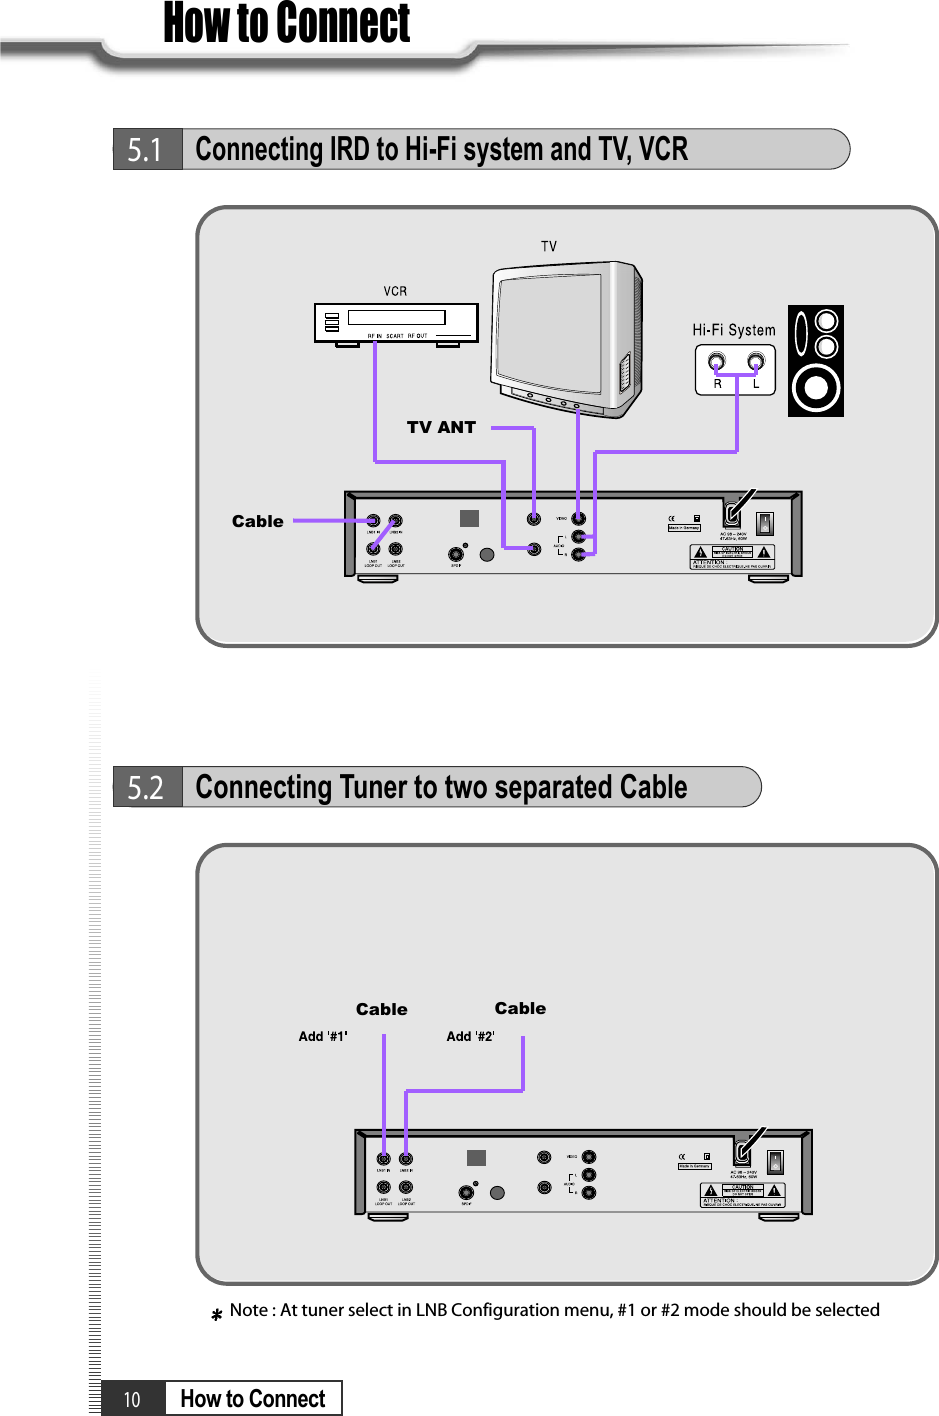 10How to ConnectHow to Connect5.1Connecting IRD to Hi-Fi system and TV, VCR5.2Connecting Tuner to two separated CableCableTV ANTCable CableNote : At tuner select in LNB Configuration menu, #1 or #2 mode should be selected